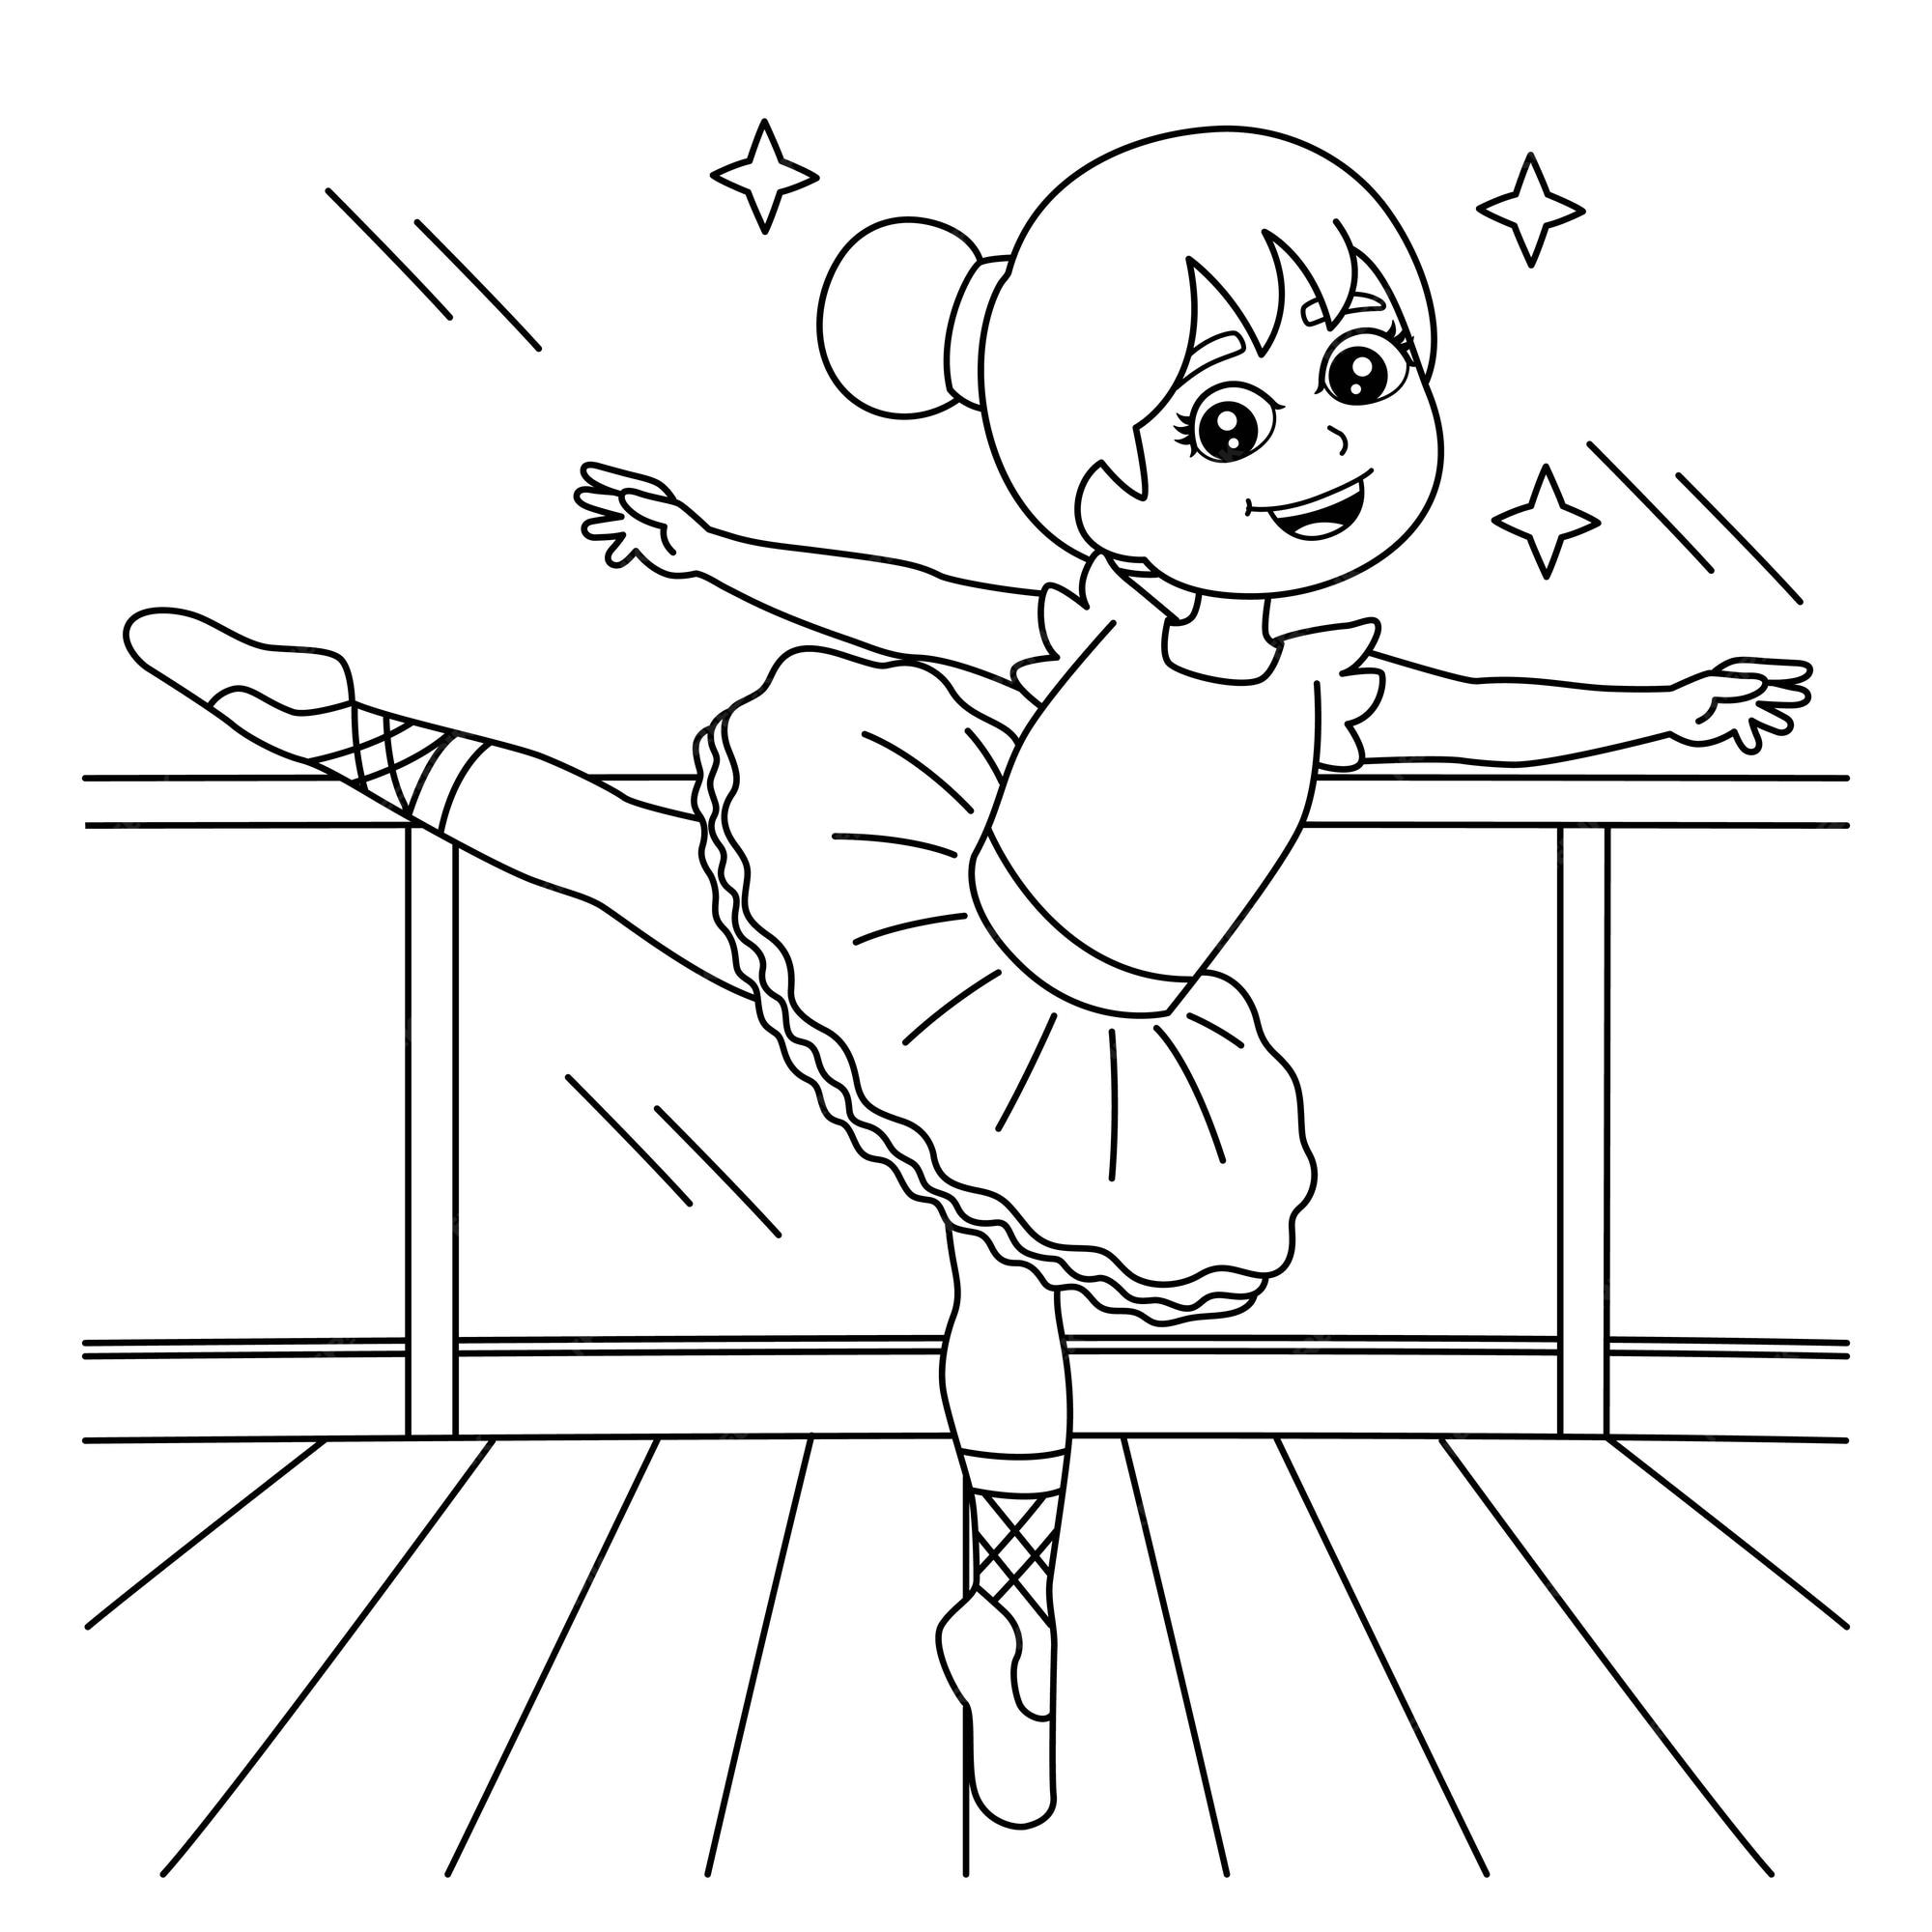 Ballerina Line Images   Free Vectors, Stock Photos & PSD   Page 20